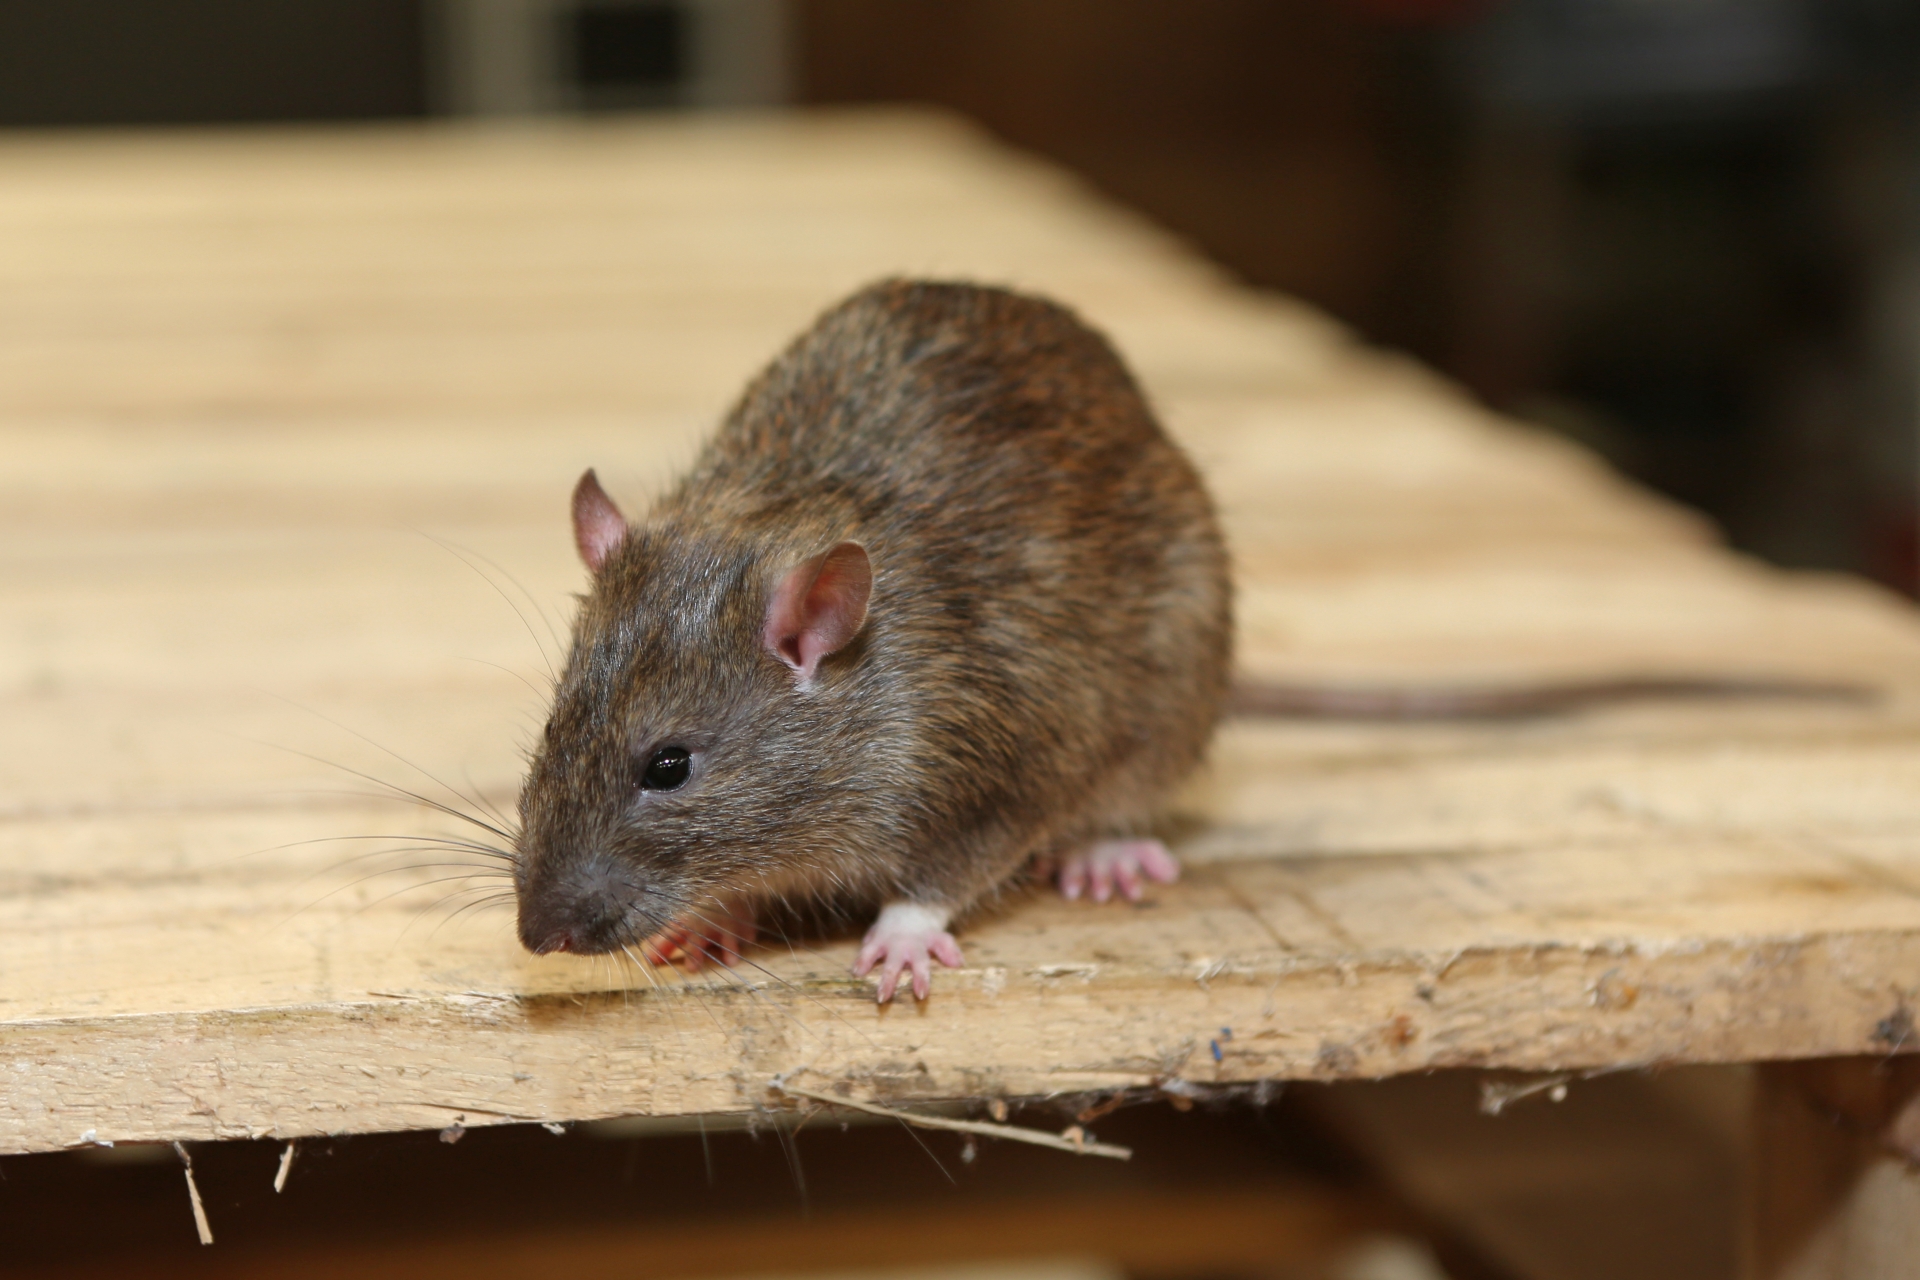 Rat Infestation, Pest Control in South Lambeth, SW8. Call Now 020 8166 9746